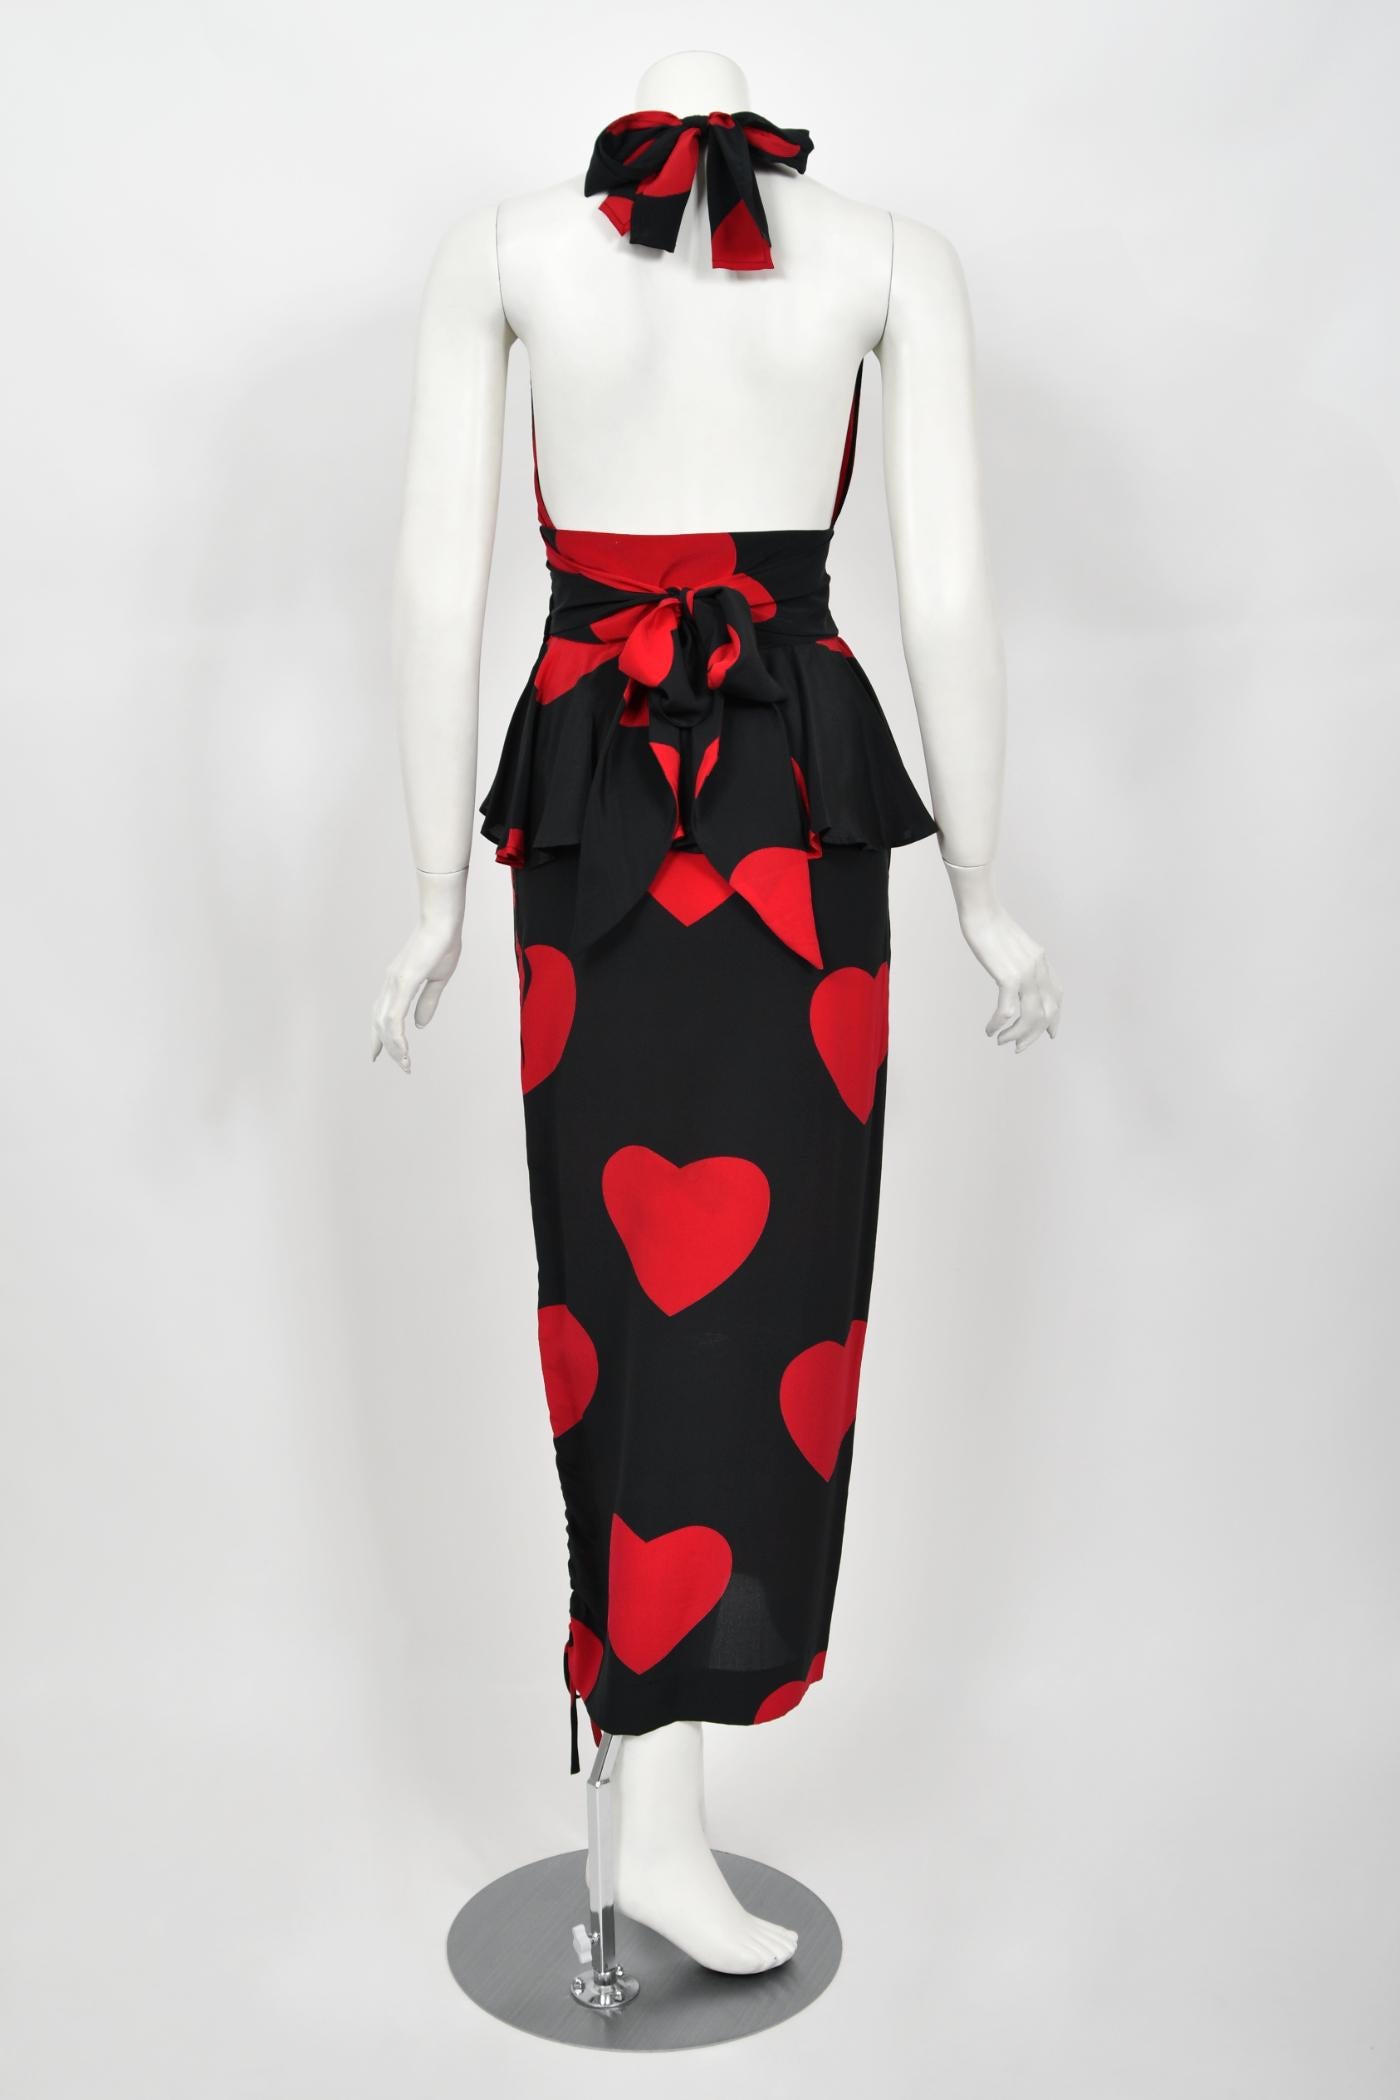 1994 Moschino Couture Documented 'Heartbreaker' Print Silk Convertible Dress  For Sale 14